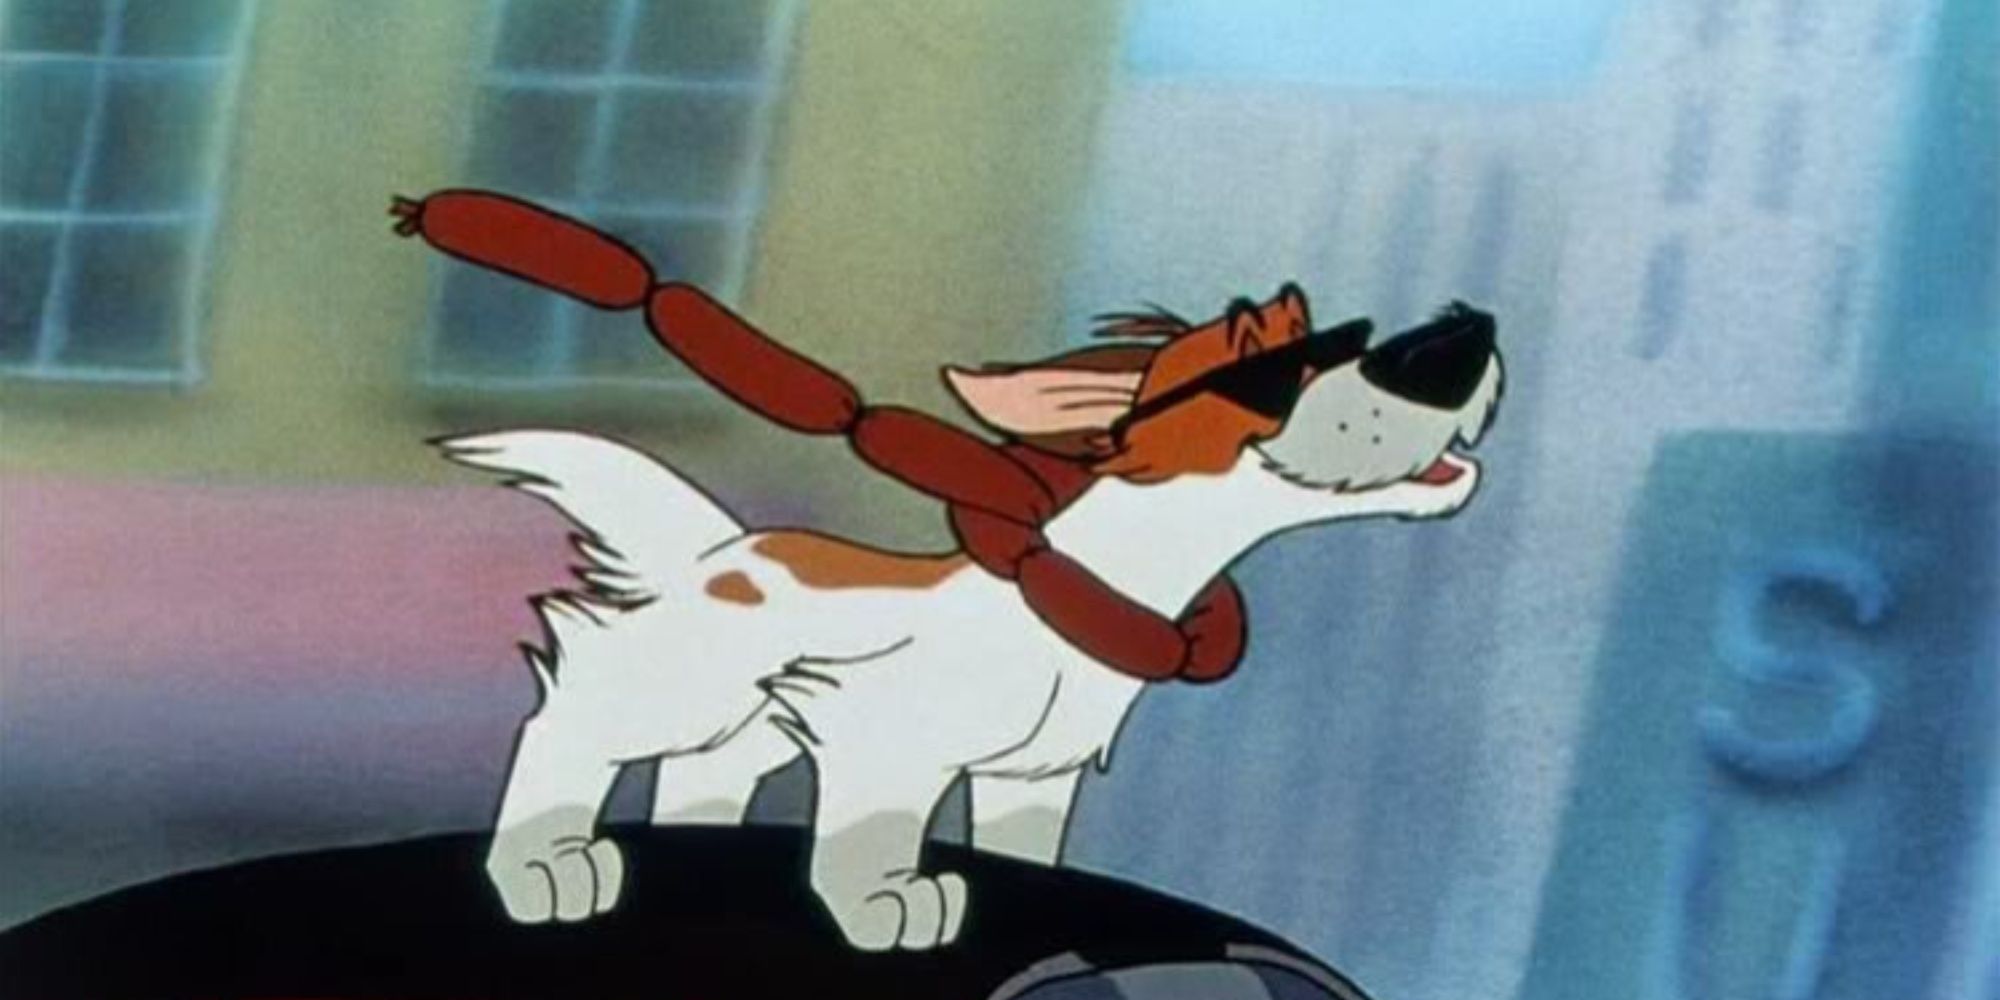 The 10 Best Dogs in Disney Movies, Ranked